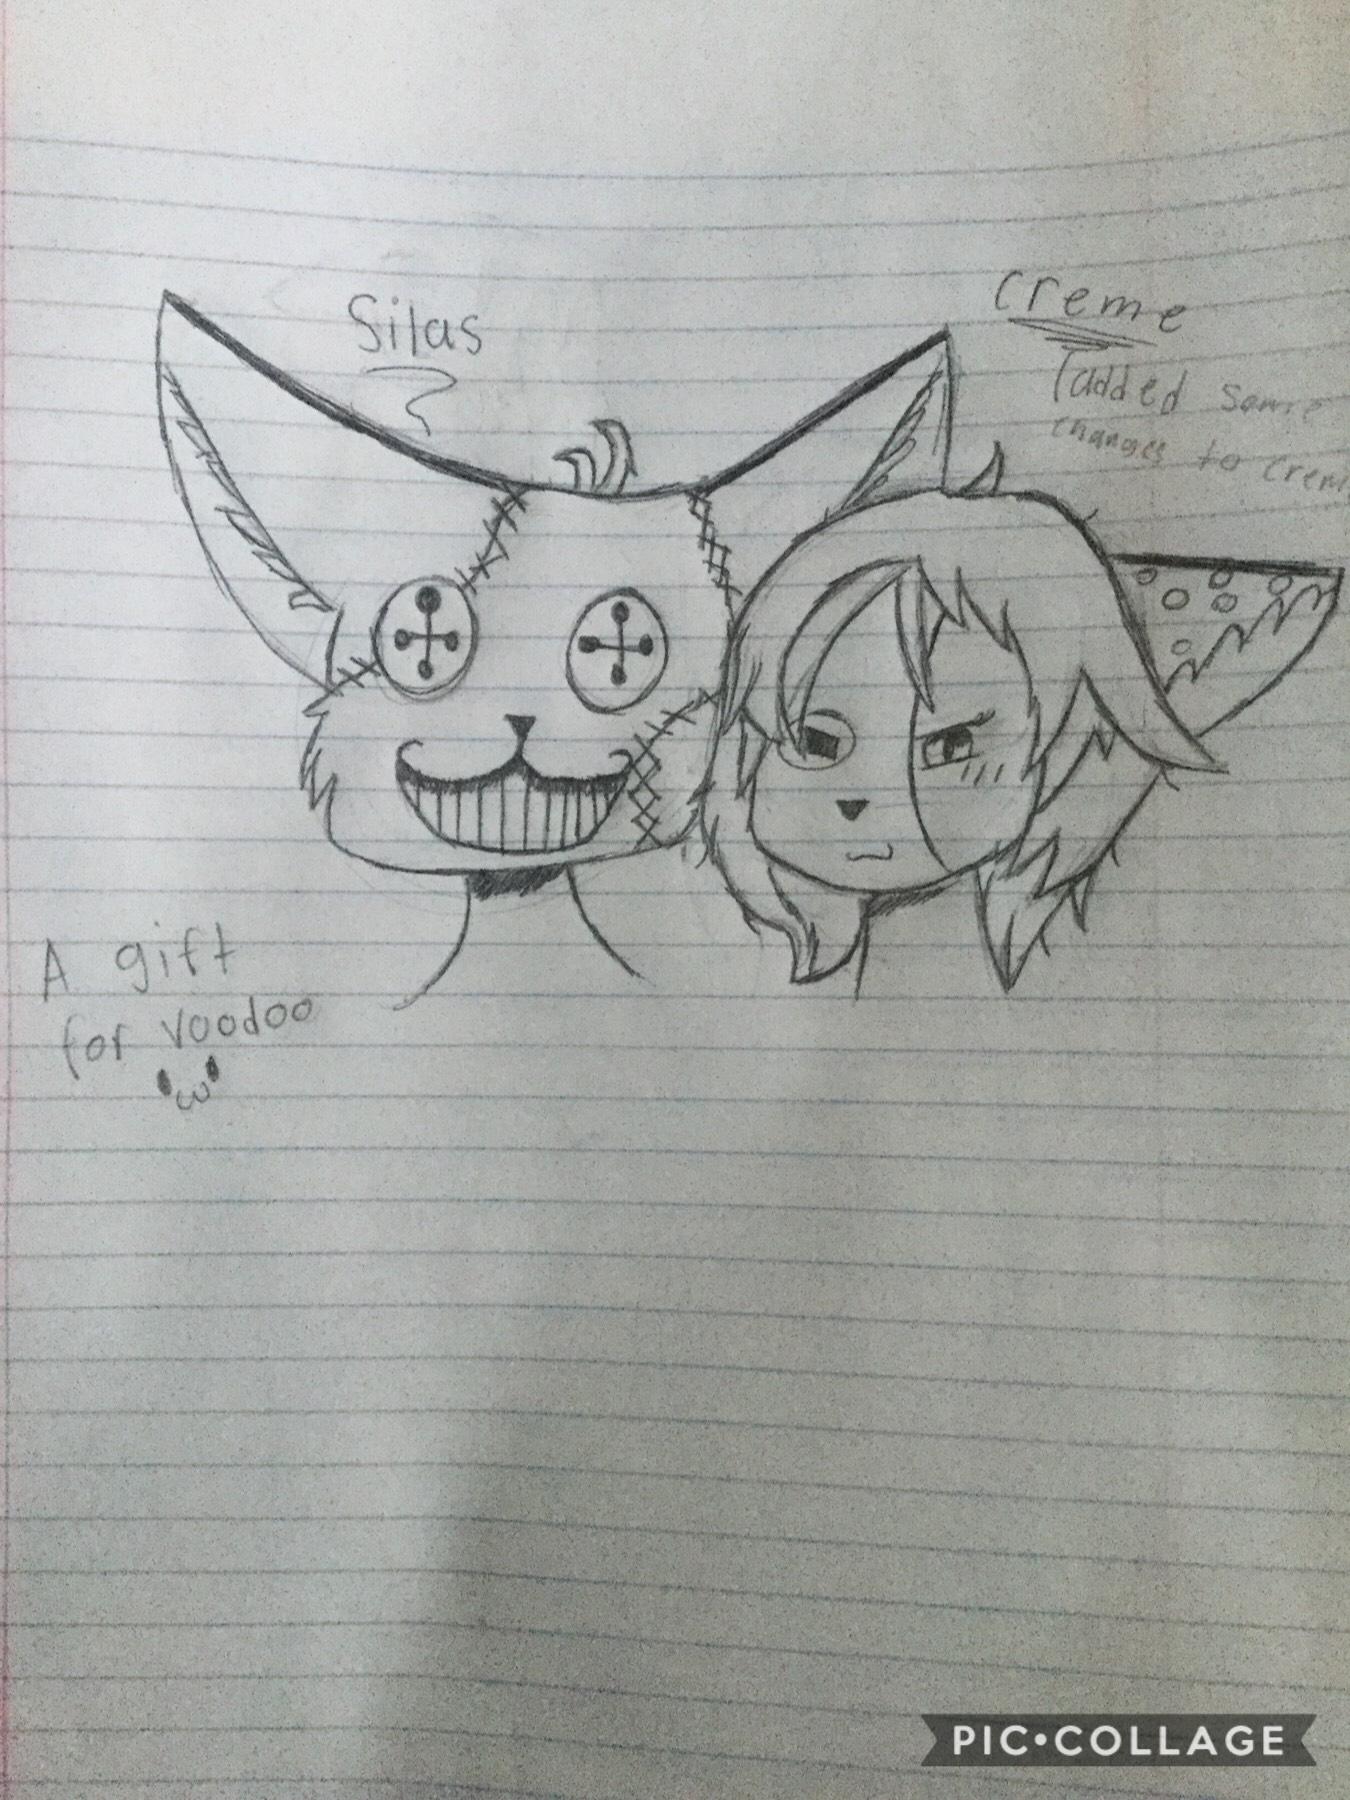 A gift for Voos! <3 I decided to draw Silas with one of my Ocs (Creme) since I don’t draw her as much. :D